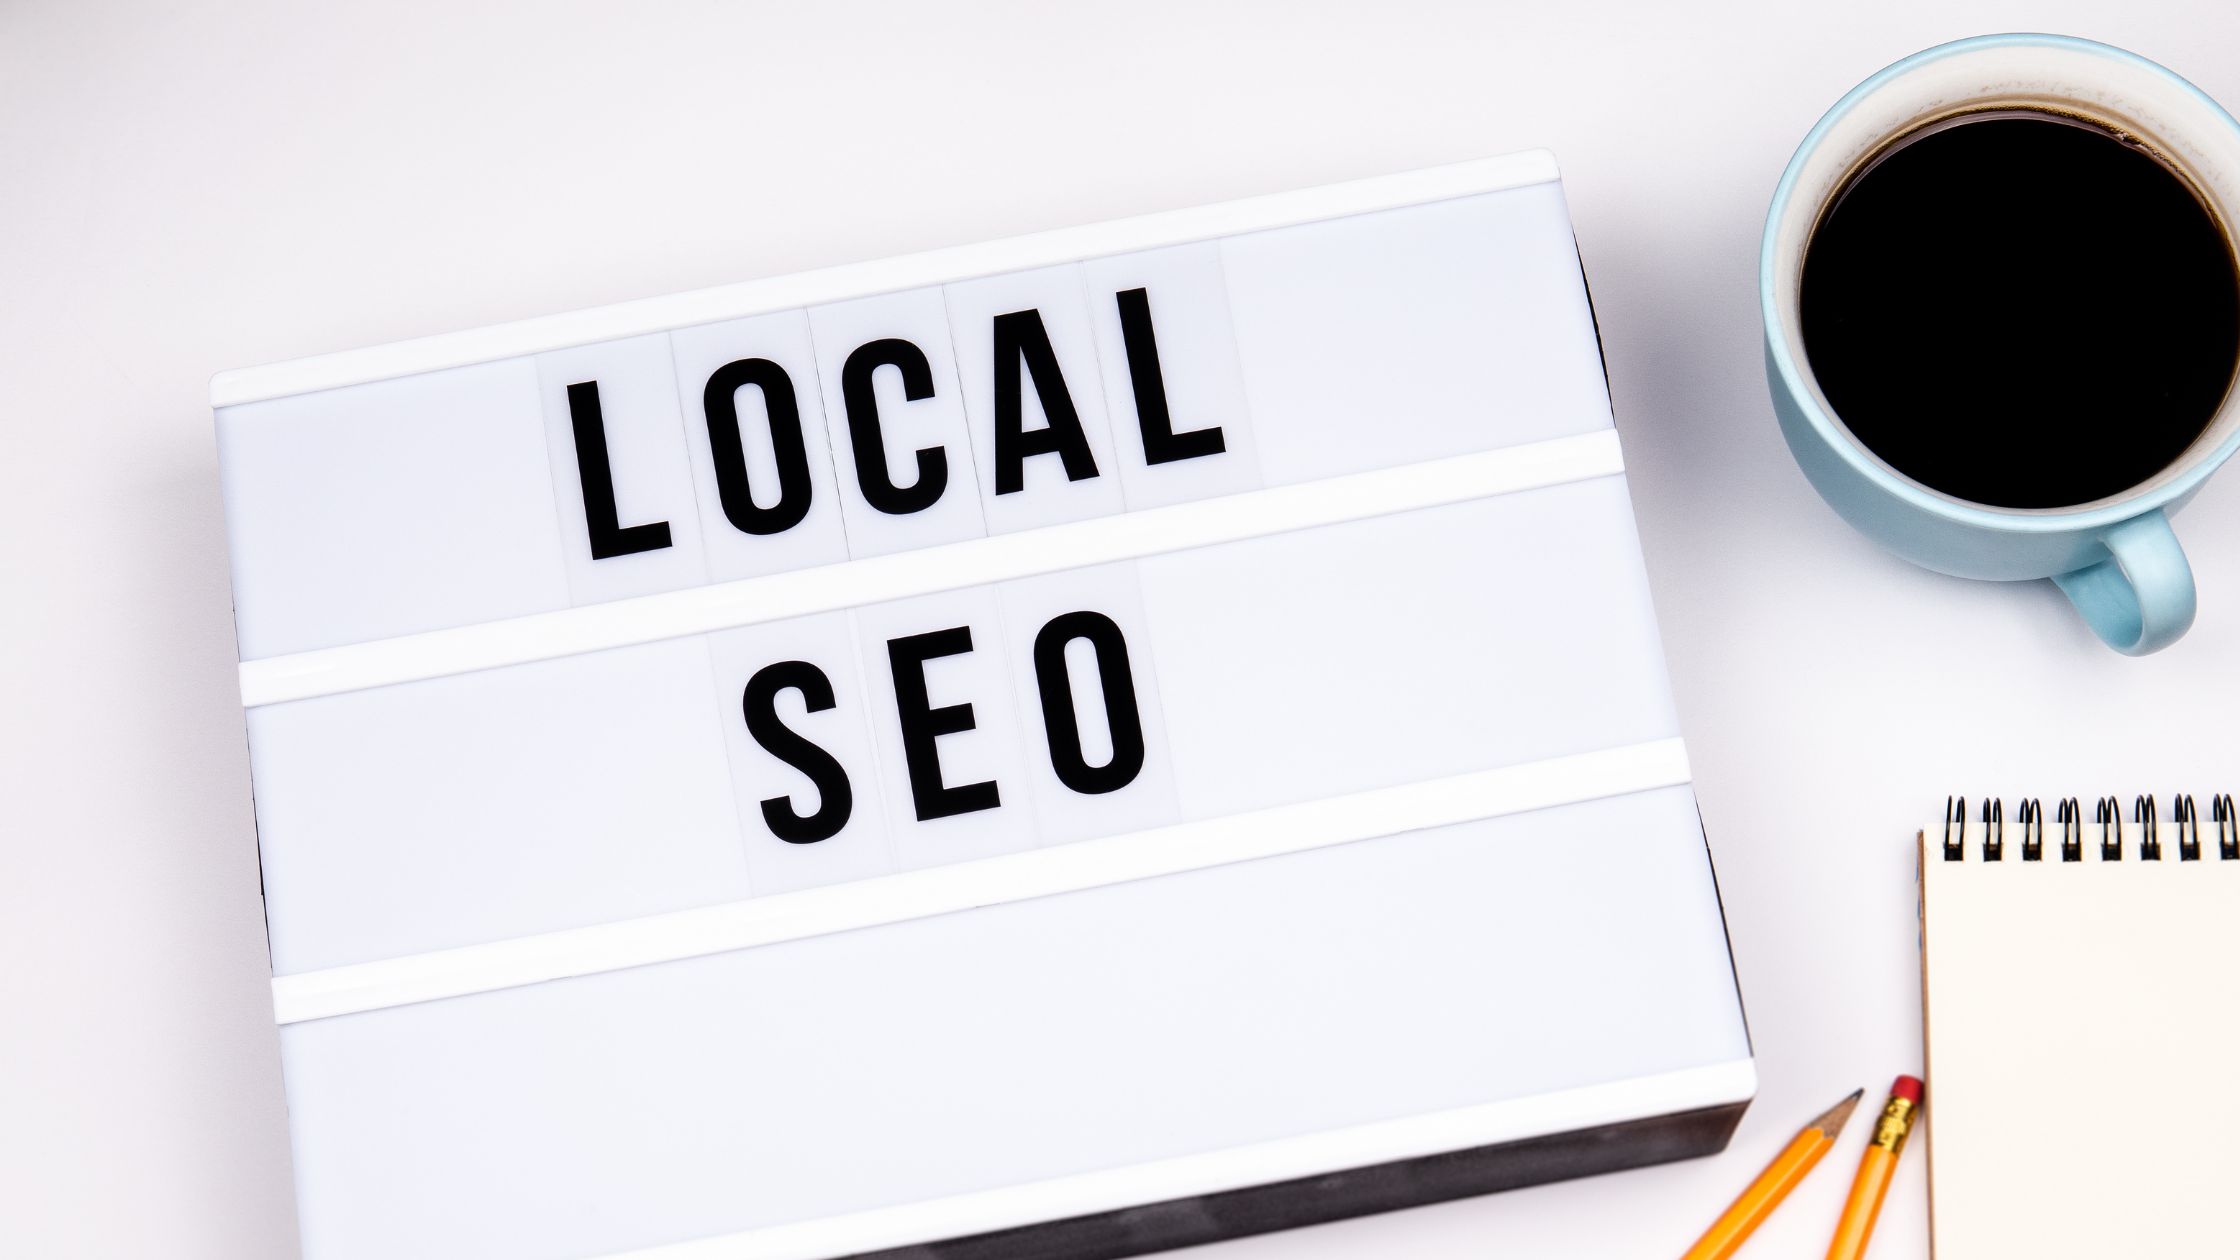 Getting Found Locally: Why local SEO is important for small business?